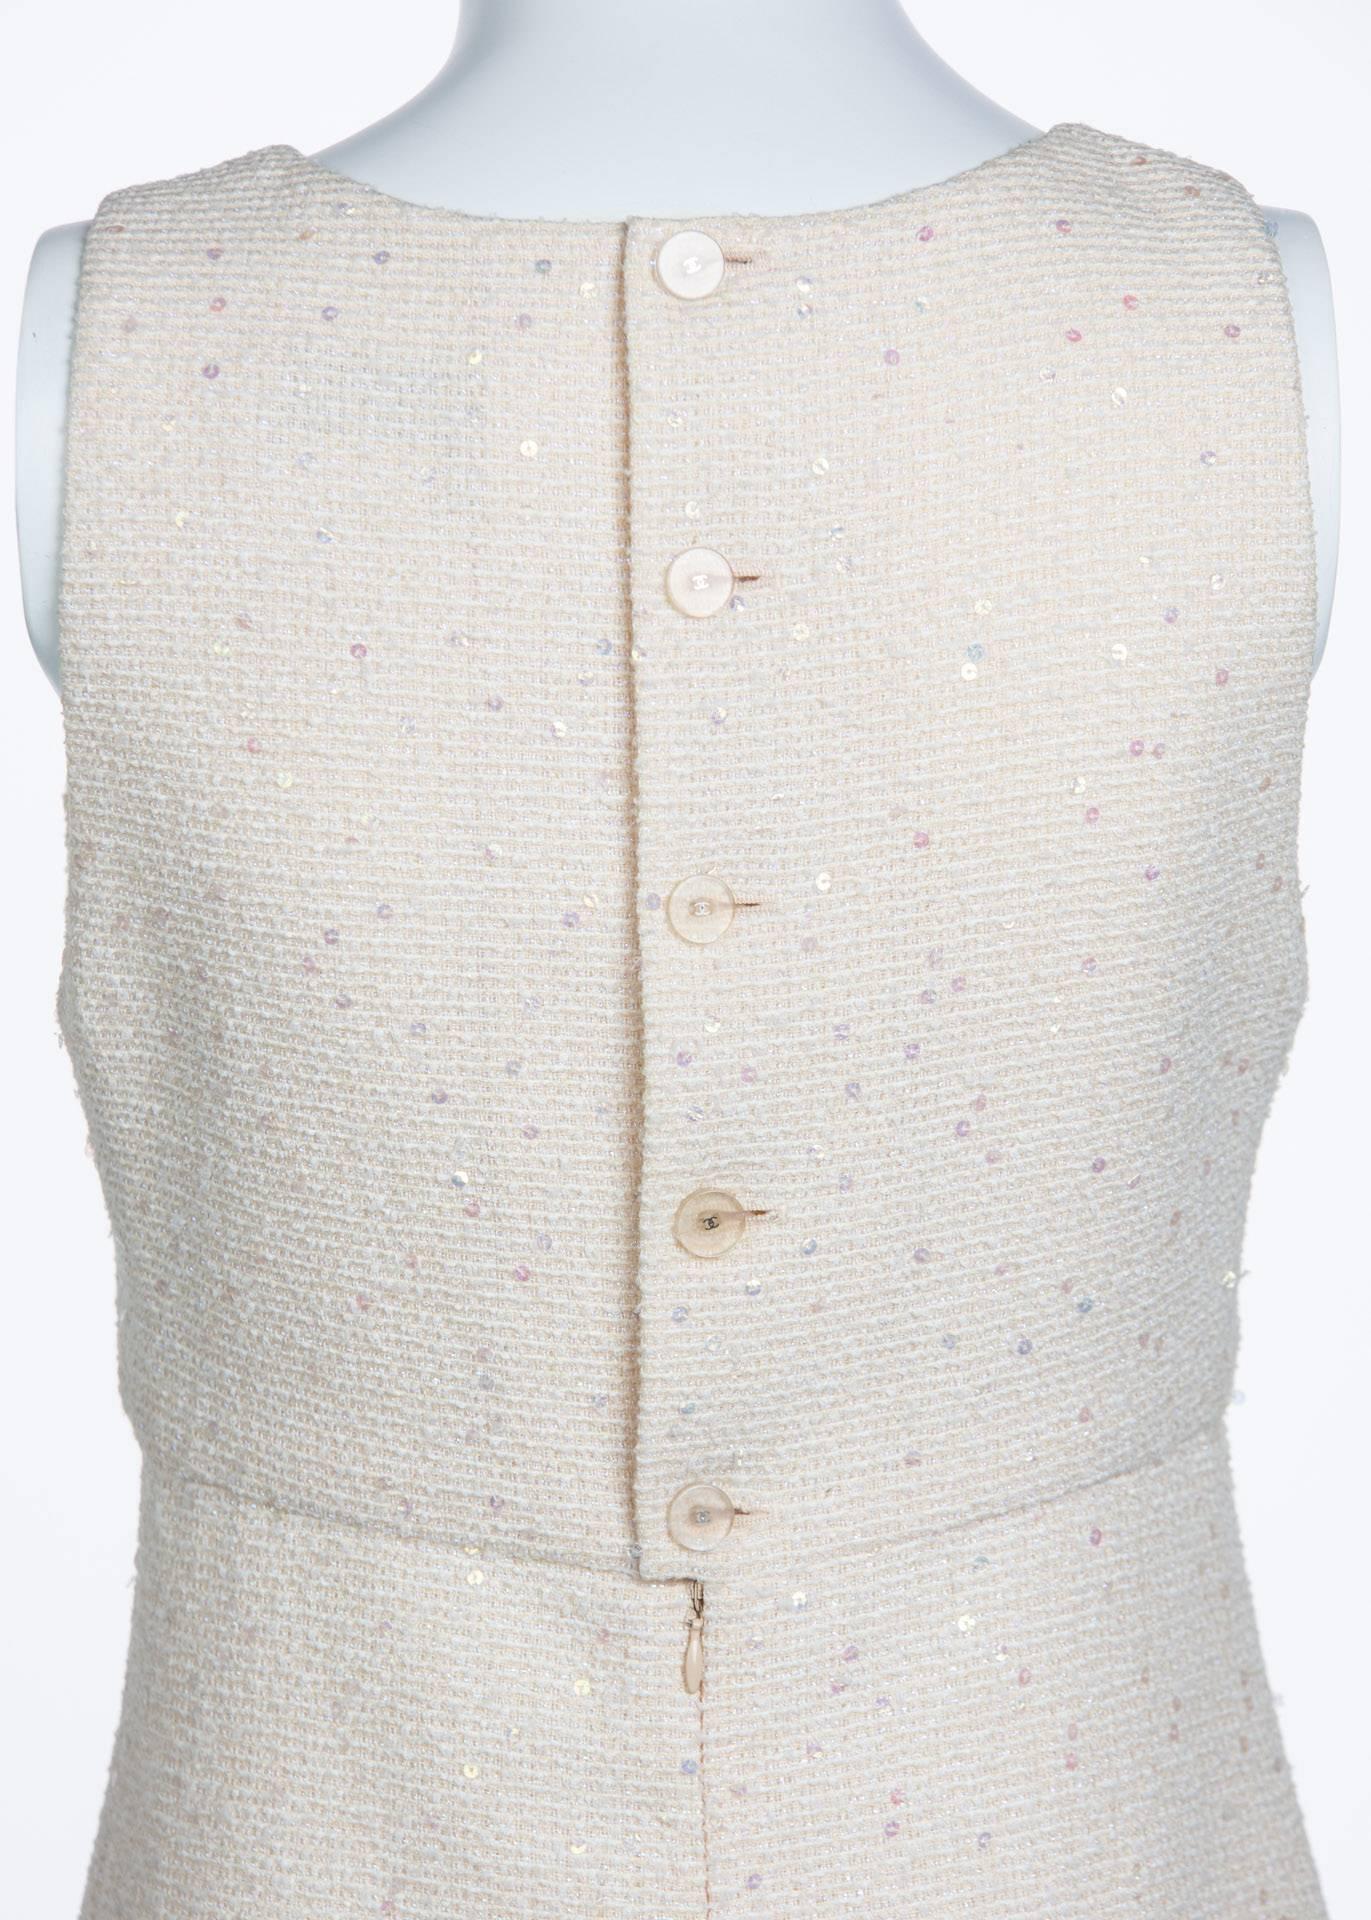 Women's Chanel Sequence Boucle Pale Pink Sleeveless Dress, 2000 